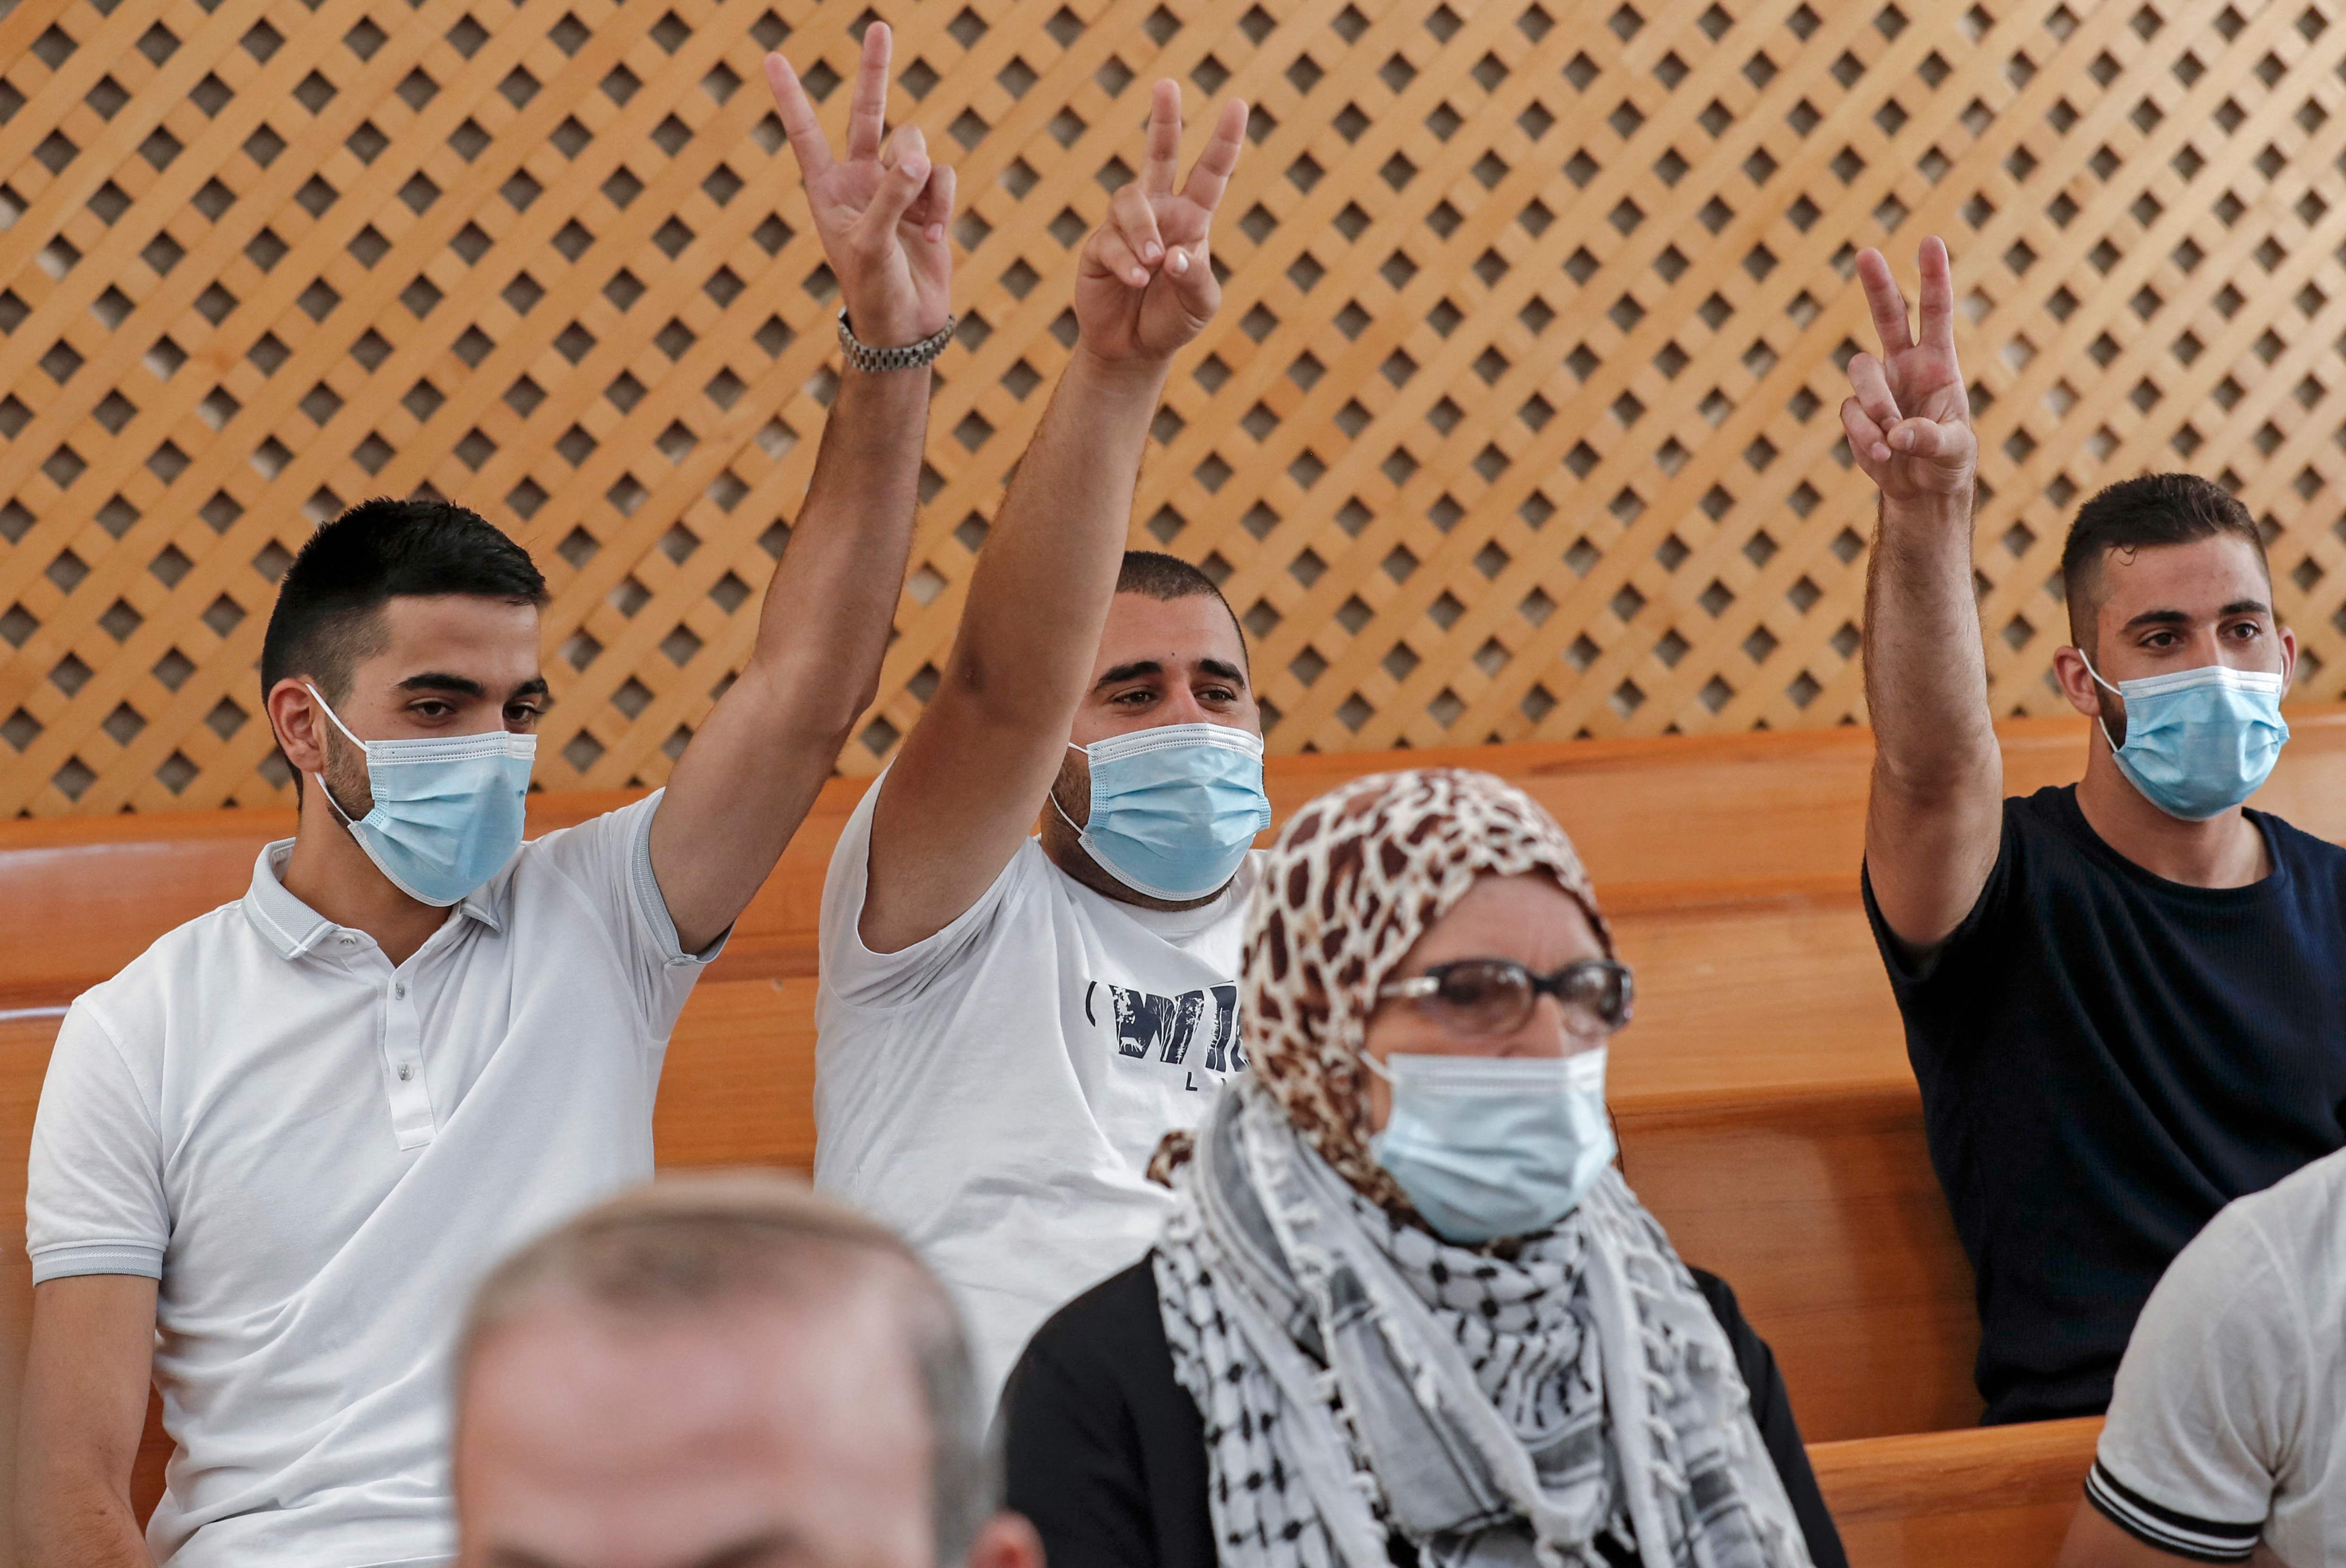 Palestinian residents of the Sheikh Jarrah neighbourhood attend a hearing at Israel's supreme court in Jerusalem on August 2